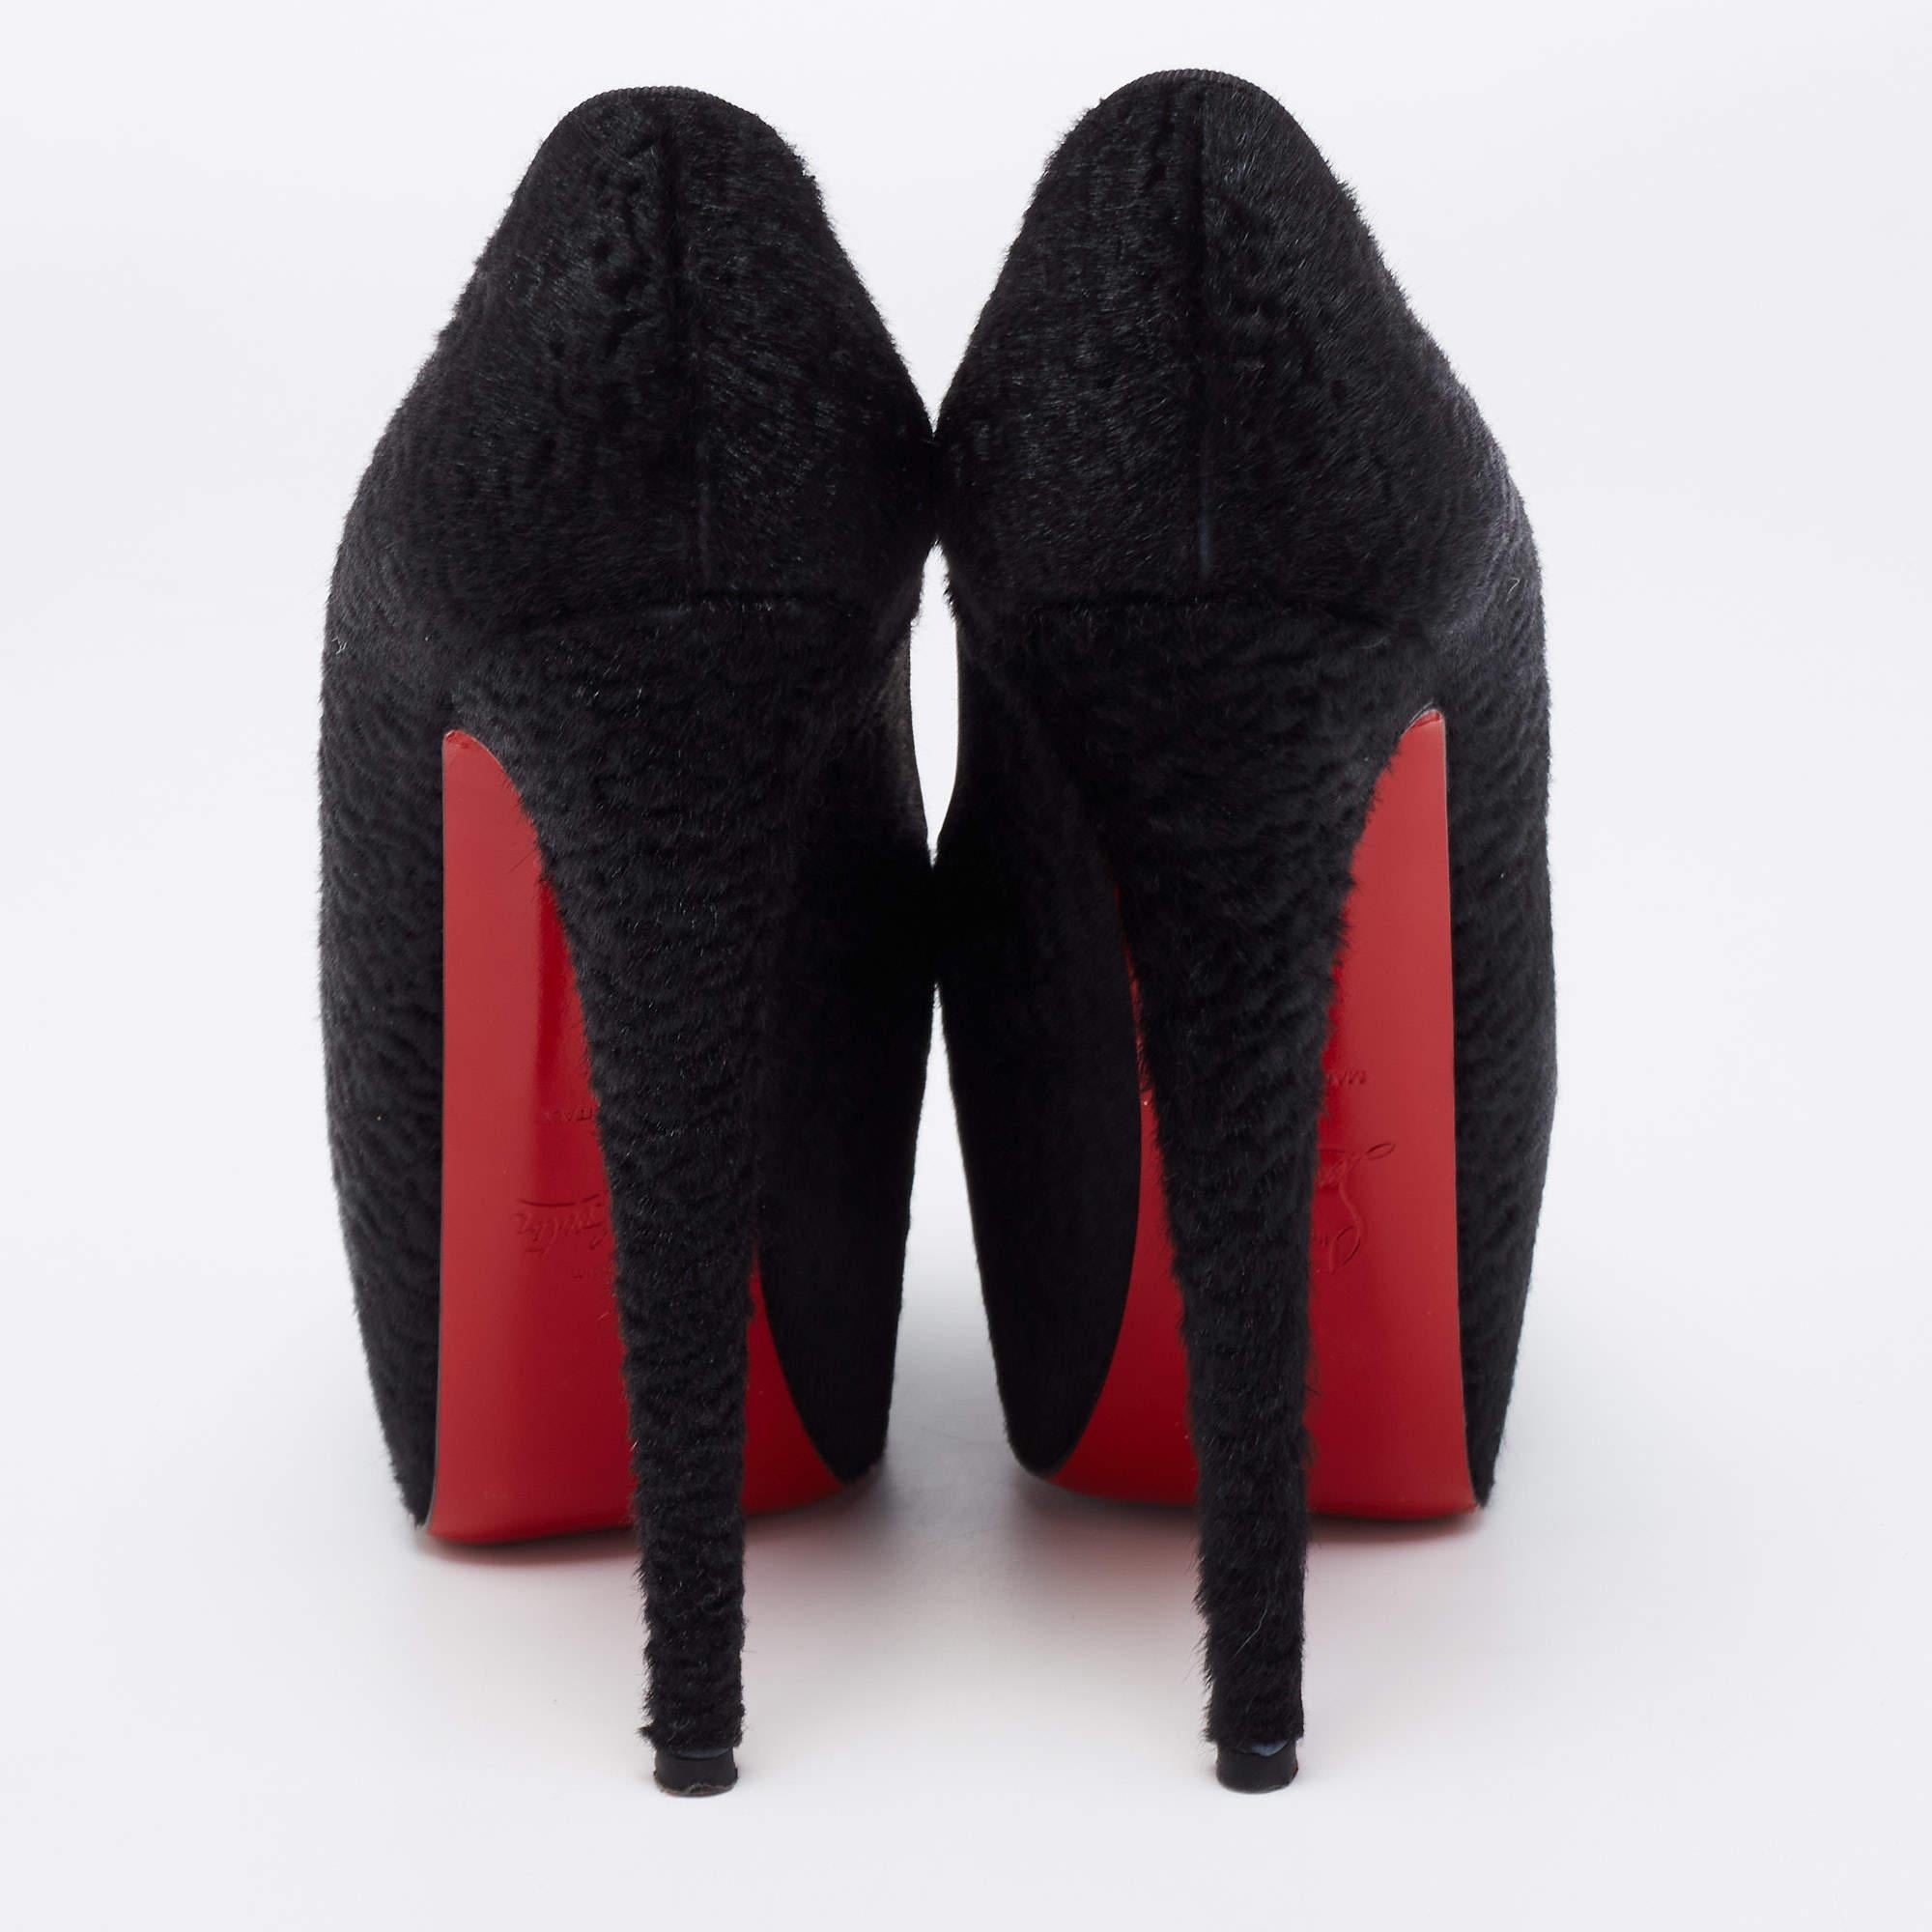 Christian Louboutin's timeless aesthetic and impeccable craftsmanship in shoemaking is evident in these statement pumps. Made from calf hair in a black shade, the sleek cuts will accentuate the curve of your feet. Finished off with high heels and